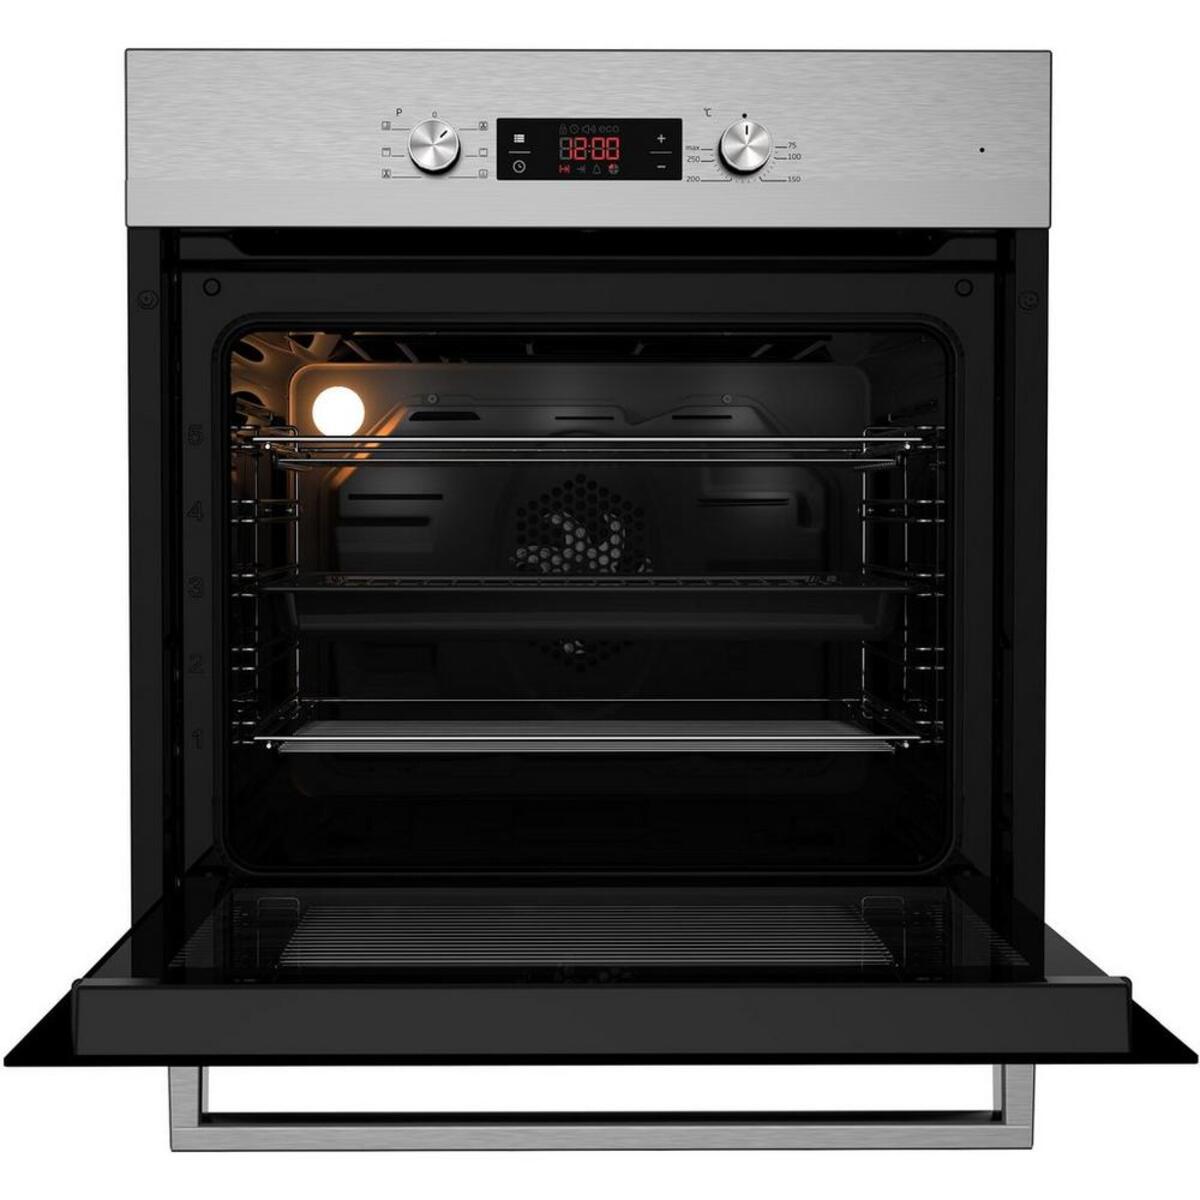 Beko CIMY91X 60cm Single Built In Electric Oven in Stainless Steel